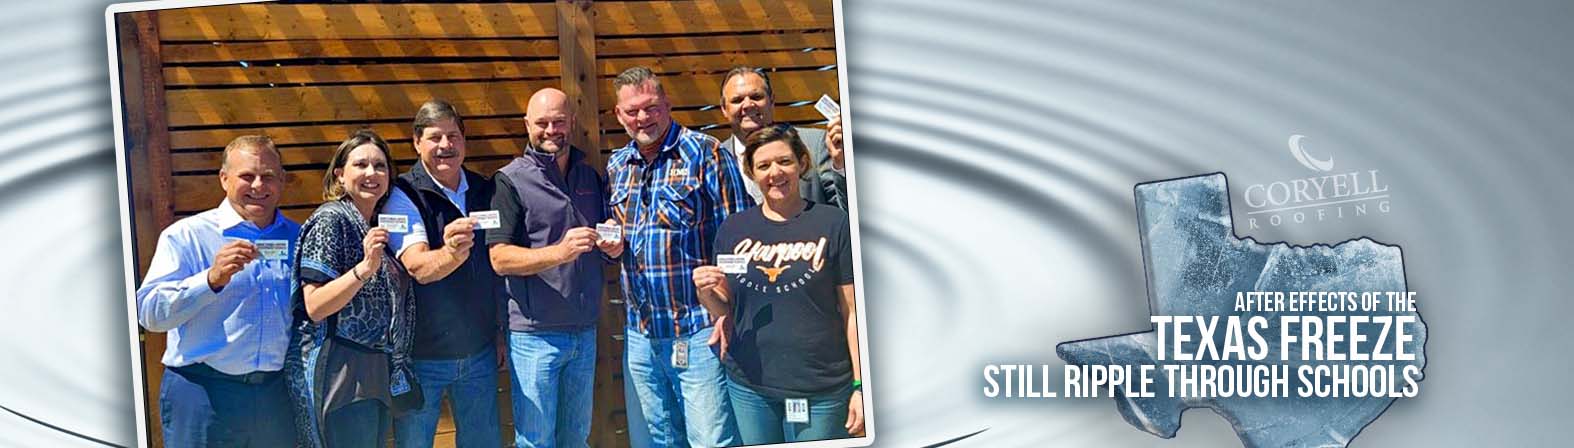 Coryell Roofing and Construction Donate Gift Cards to Denton ISD’s Harpool Middle School in Lantana, TX